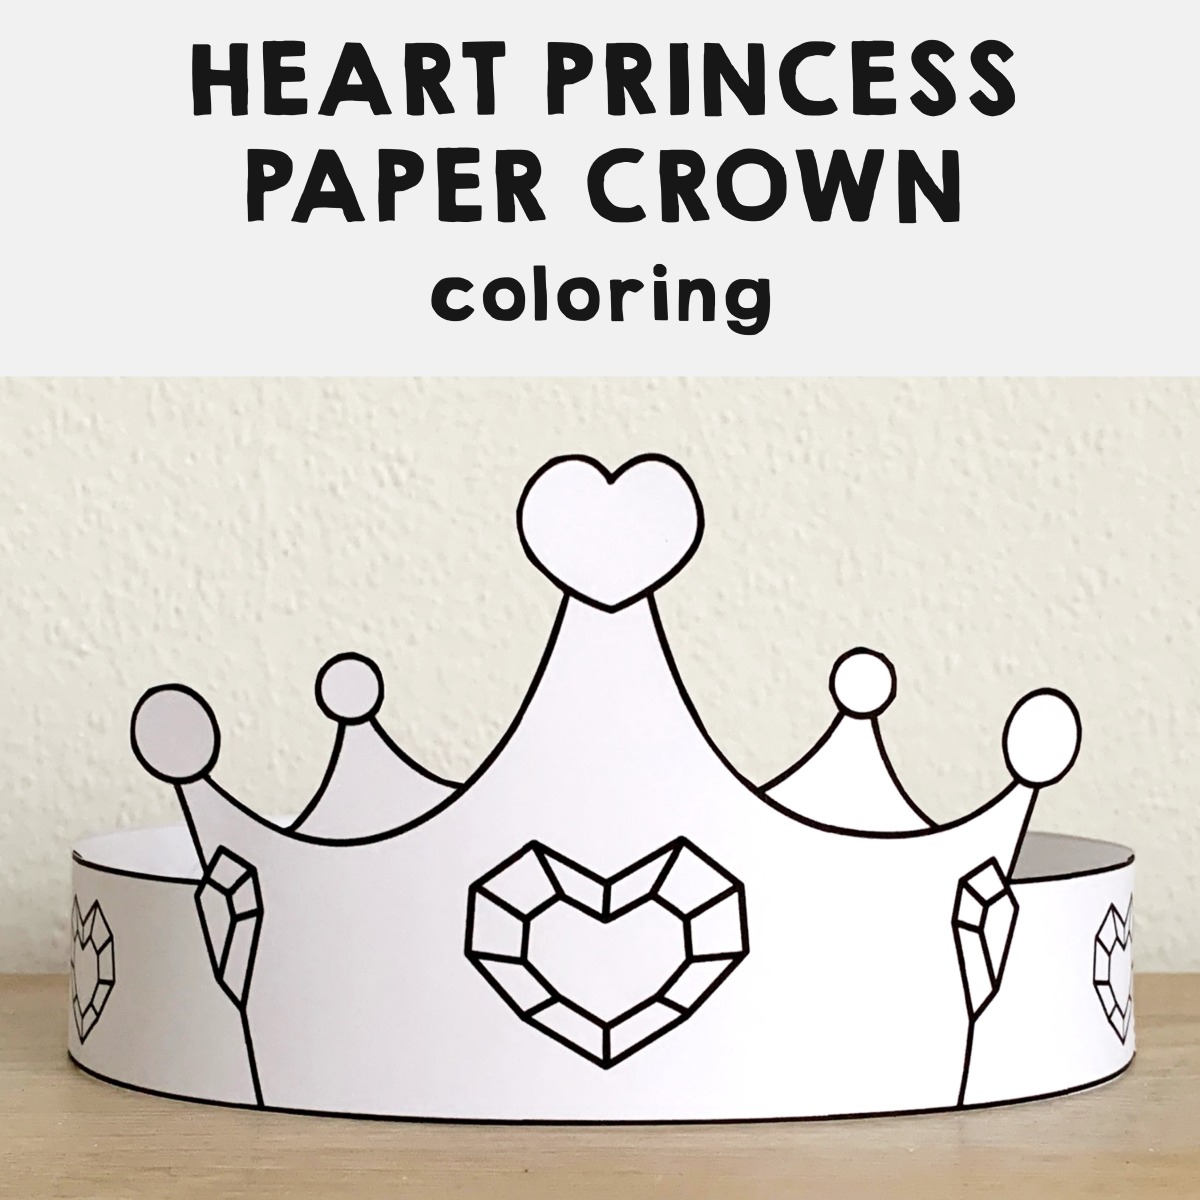 Heart princess paper crown printable coloring valentine craft activity made by teachers